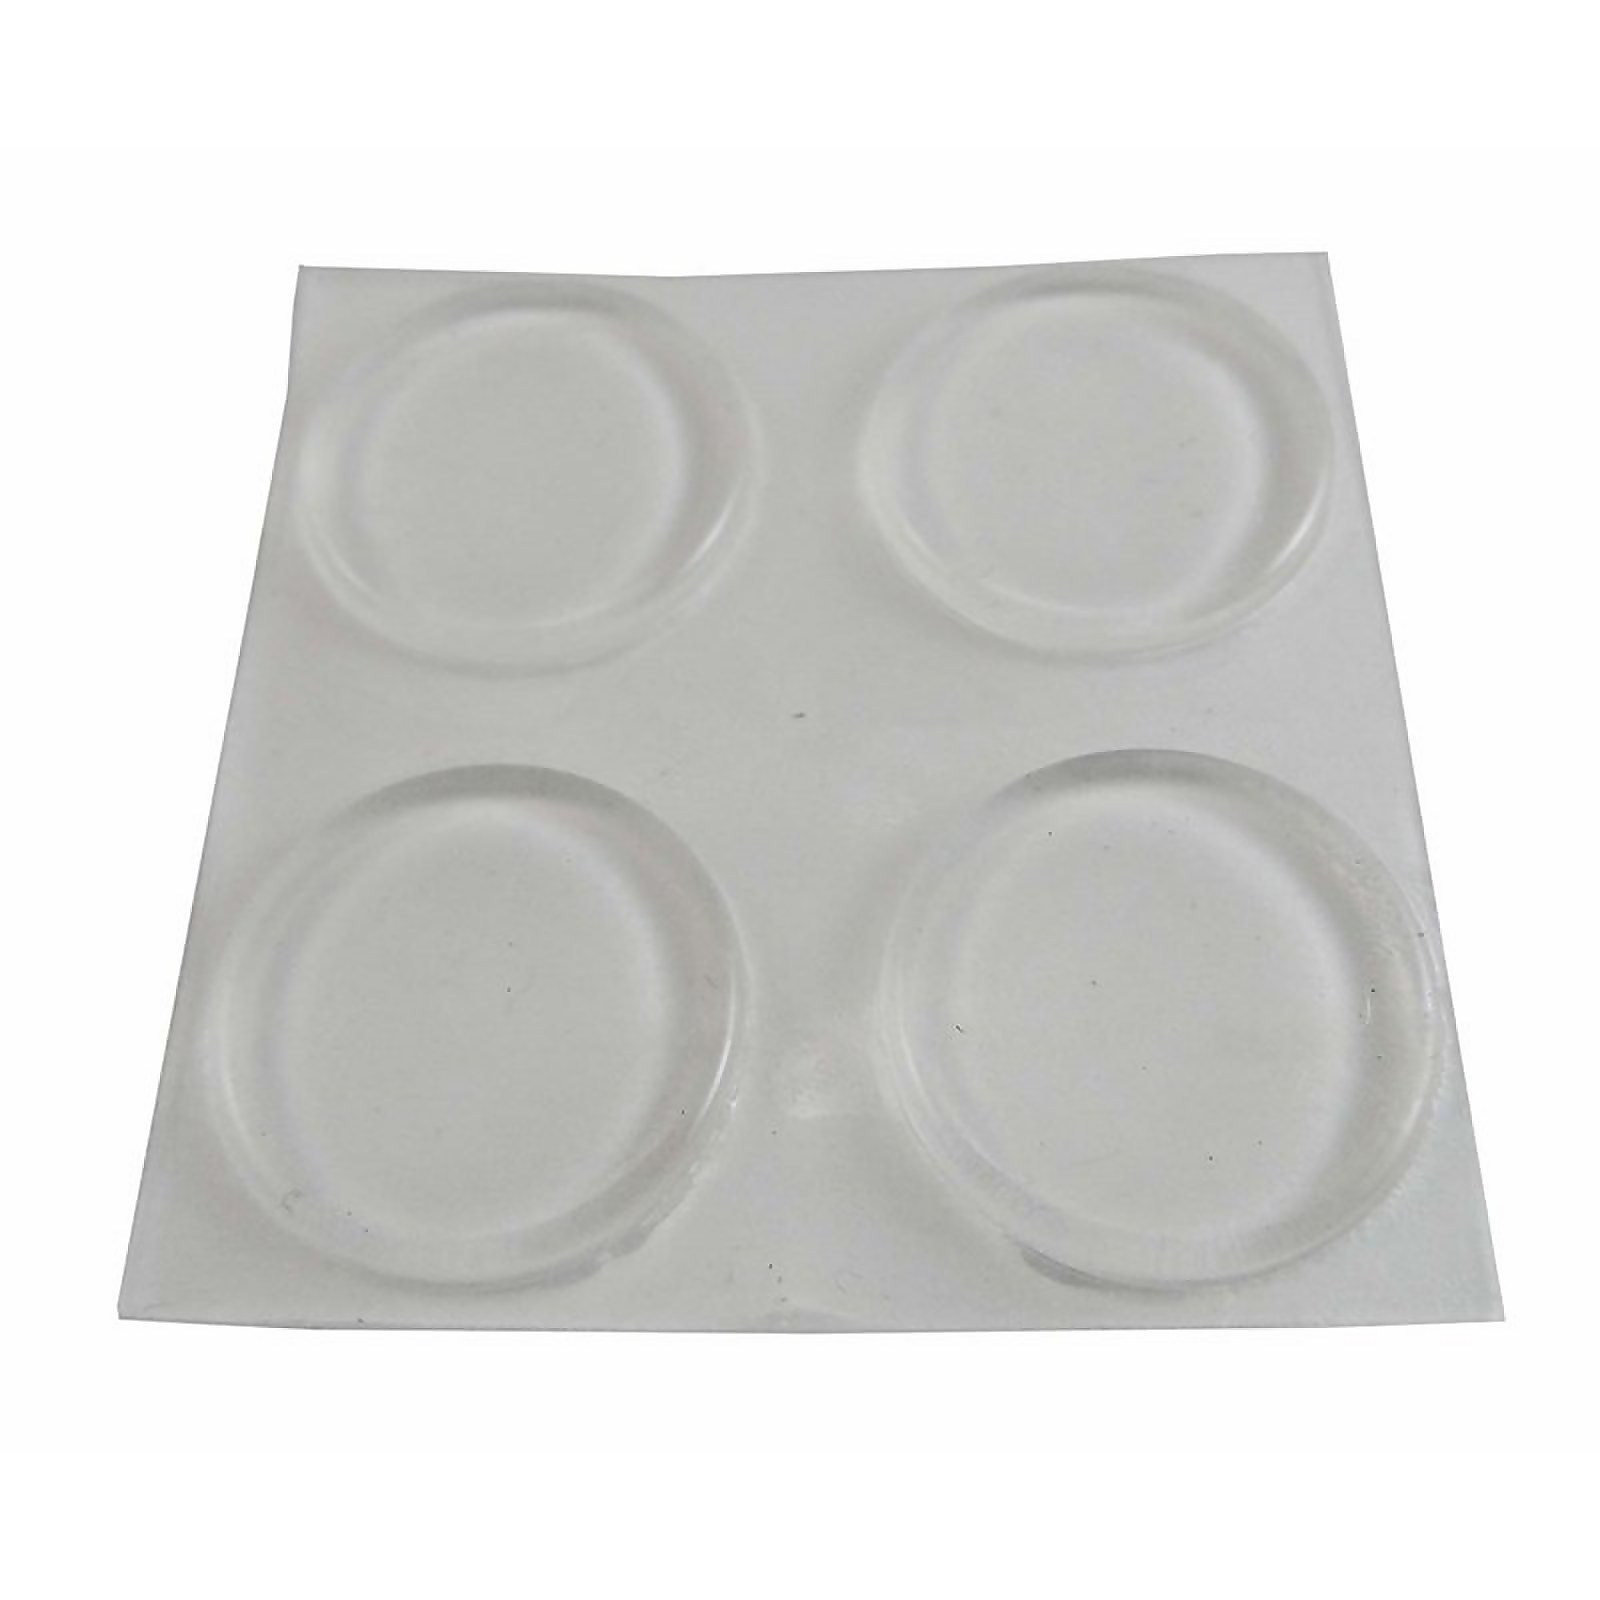 Photo of Protective Pad Clear 19mm - 8 Pack